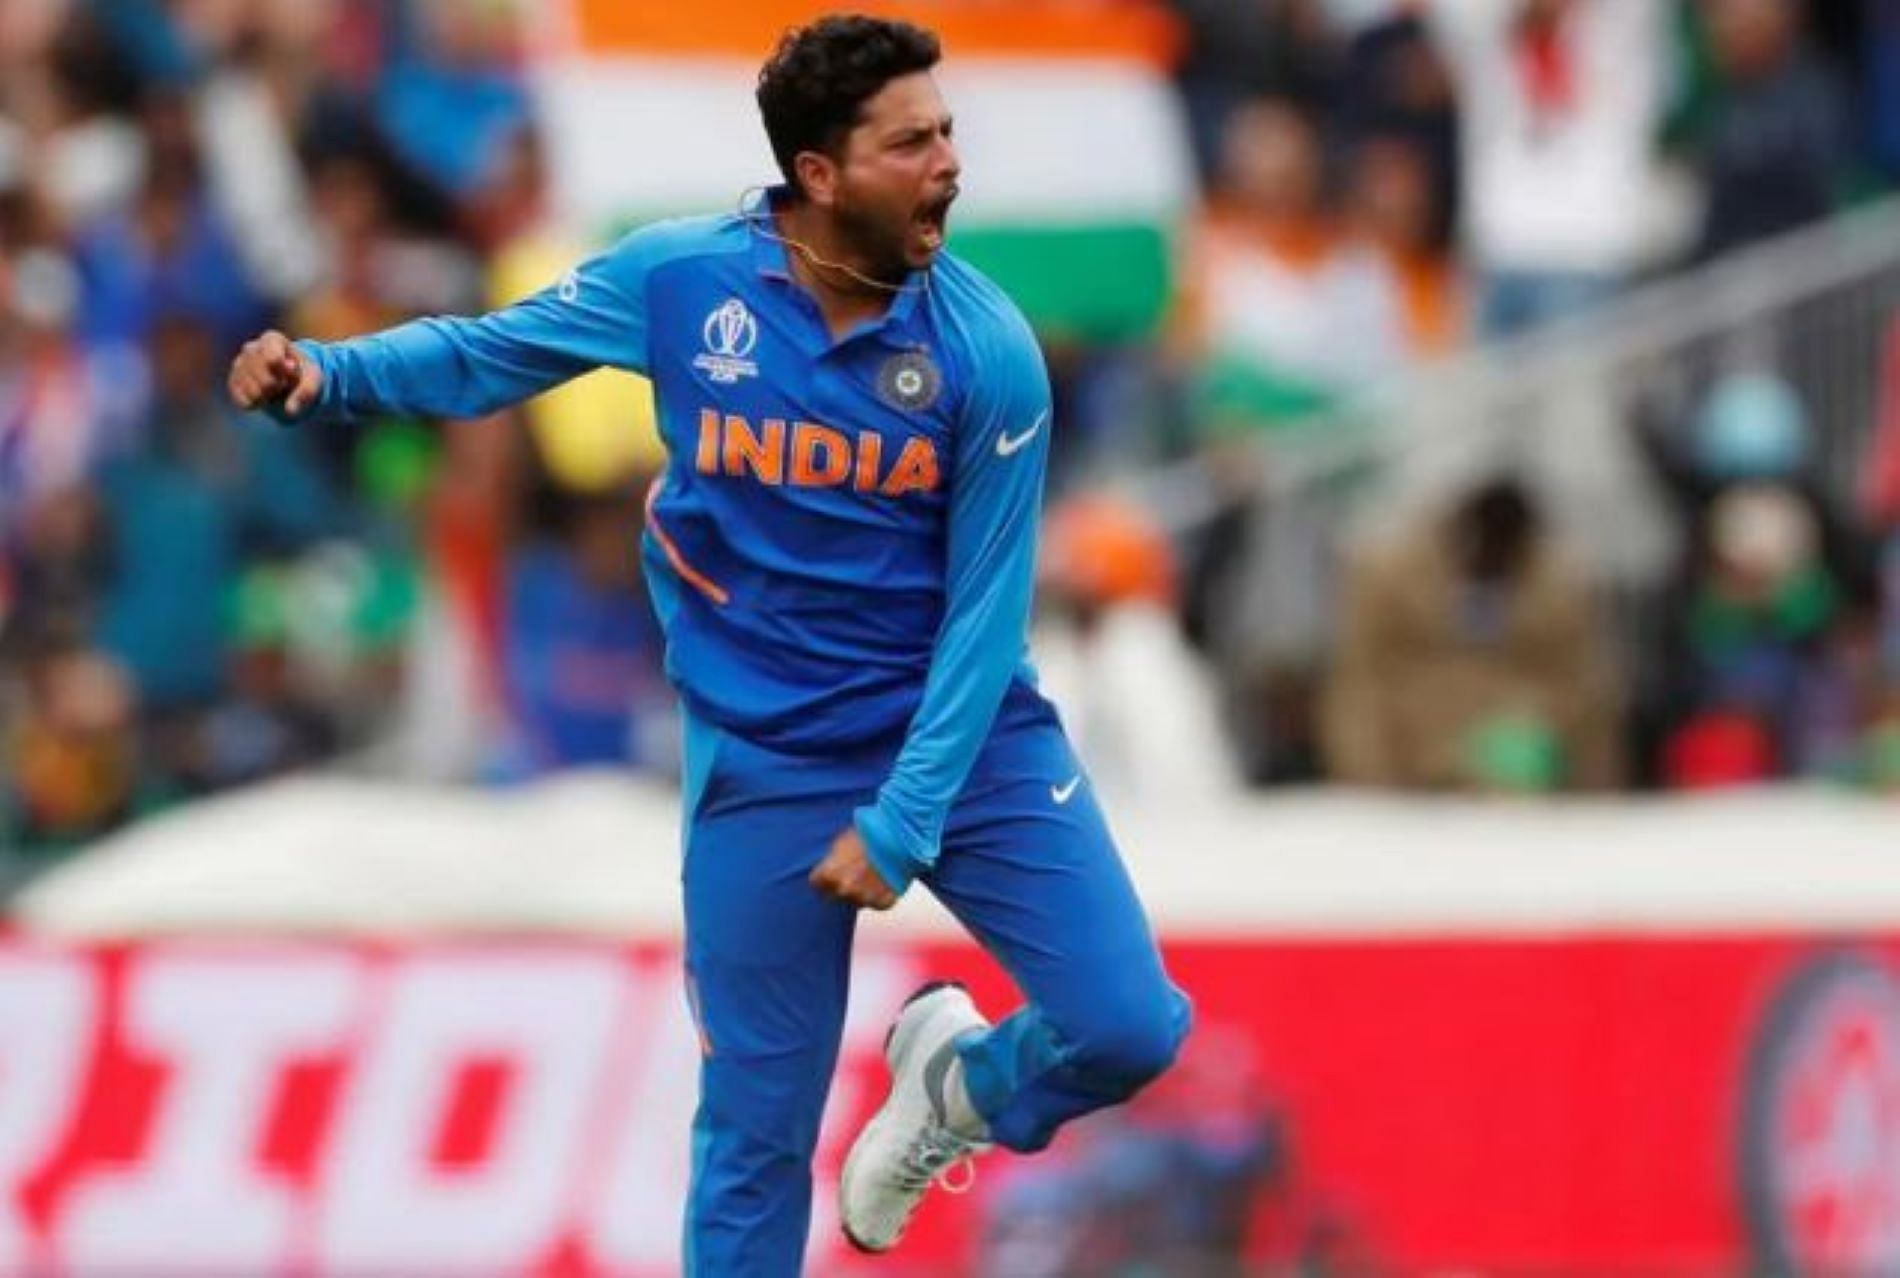 Kuldeep Yadav weaved his magic several times in the 2019 World Cup